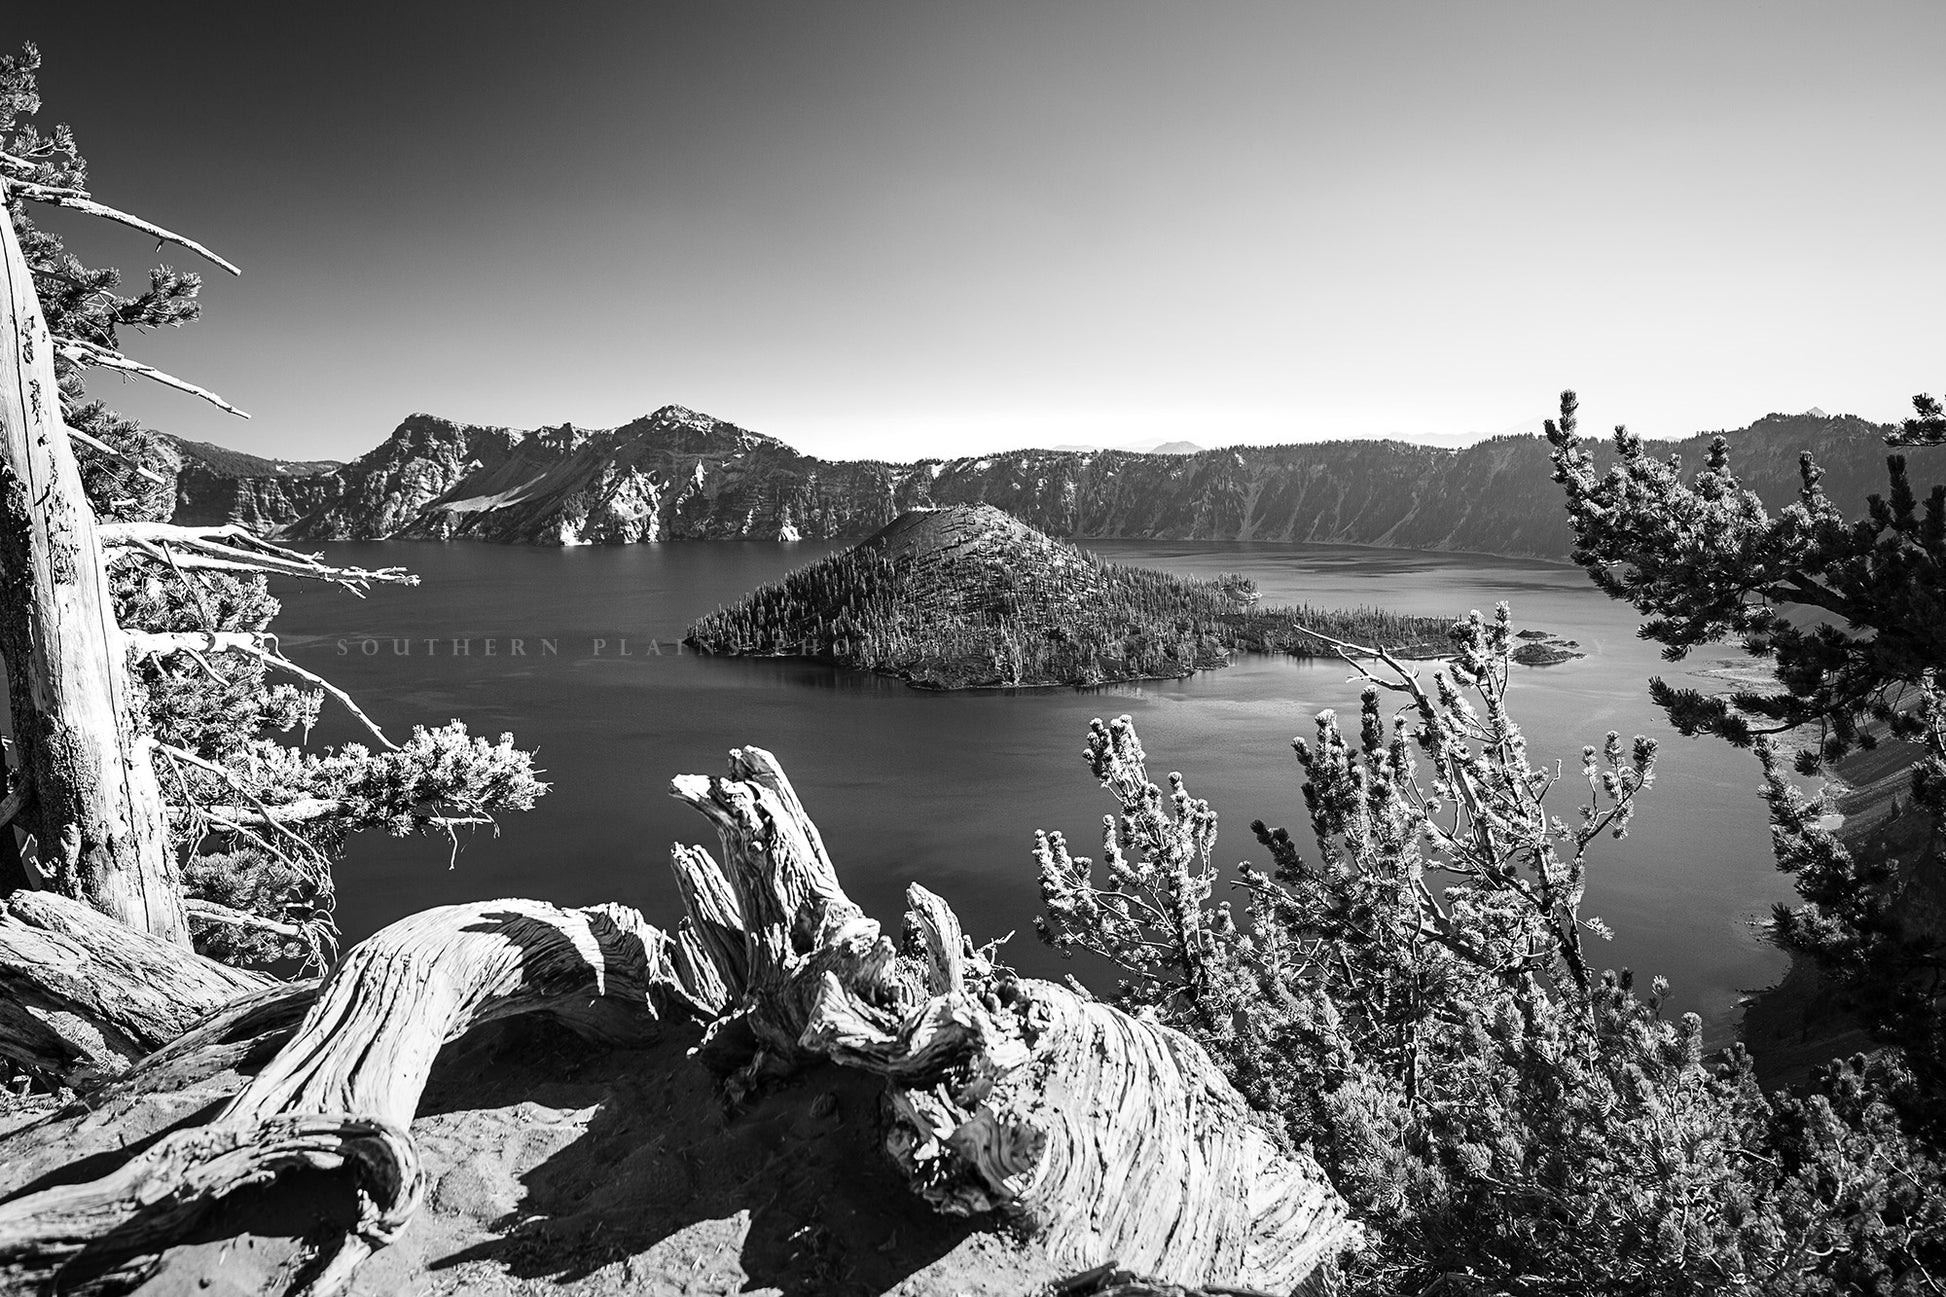 Black and white Pacific Northwest photography print of Wizard Island framed by trees at the rim of Crater Lake at Crater Lake National Park, Oregon by Sean Ramsey of Southern Plains Photography.